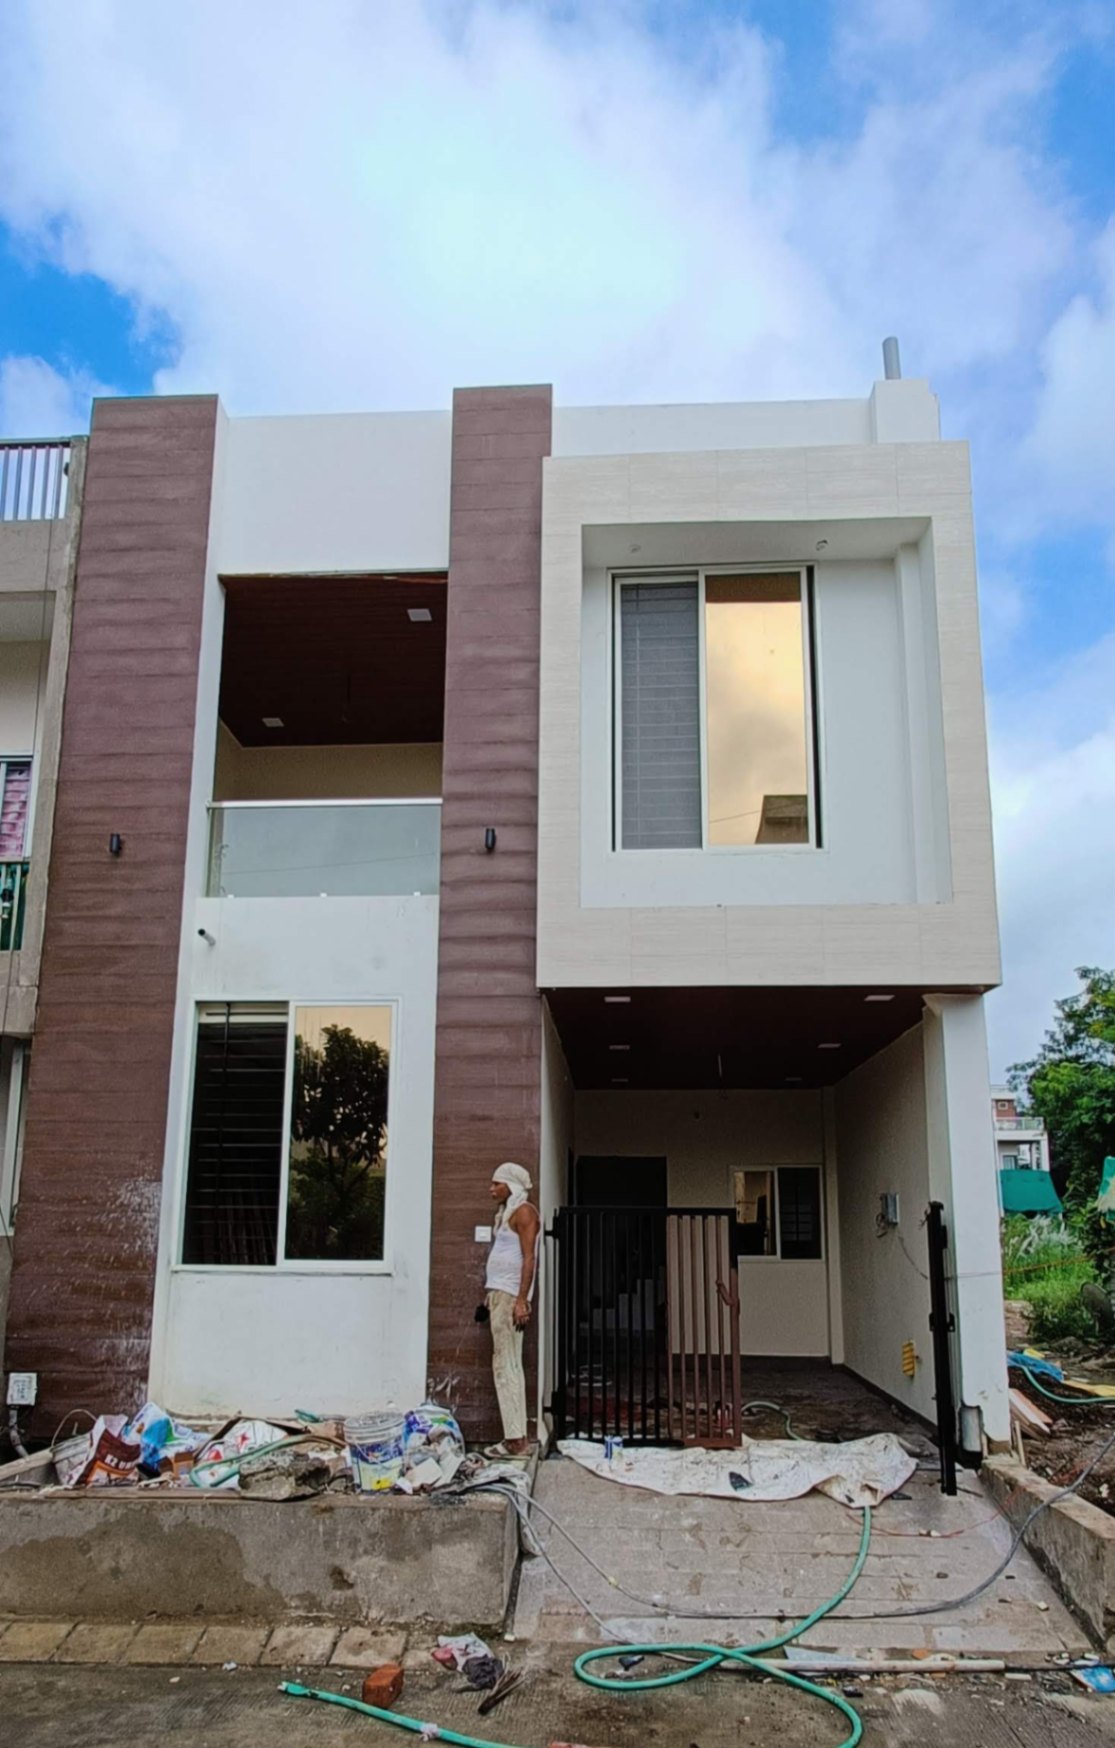 3 Bed/ 3 Bath Sell House/ Bungalow/ Villa; 1,750 sq. ft. carpet area; 800 sq. ft. lot for sale @Omaxe city 1 Ab bypass road indore 